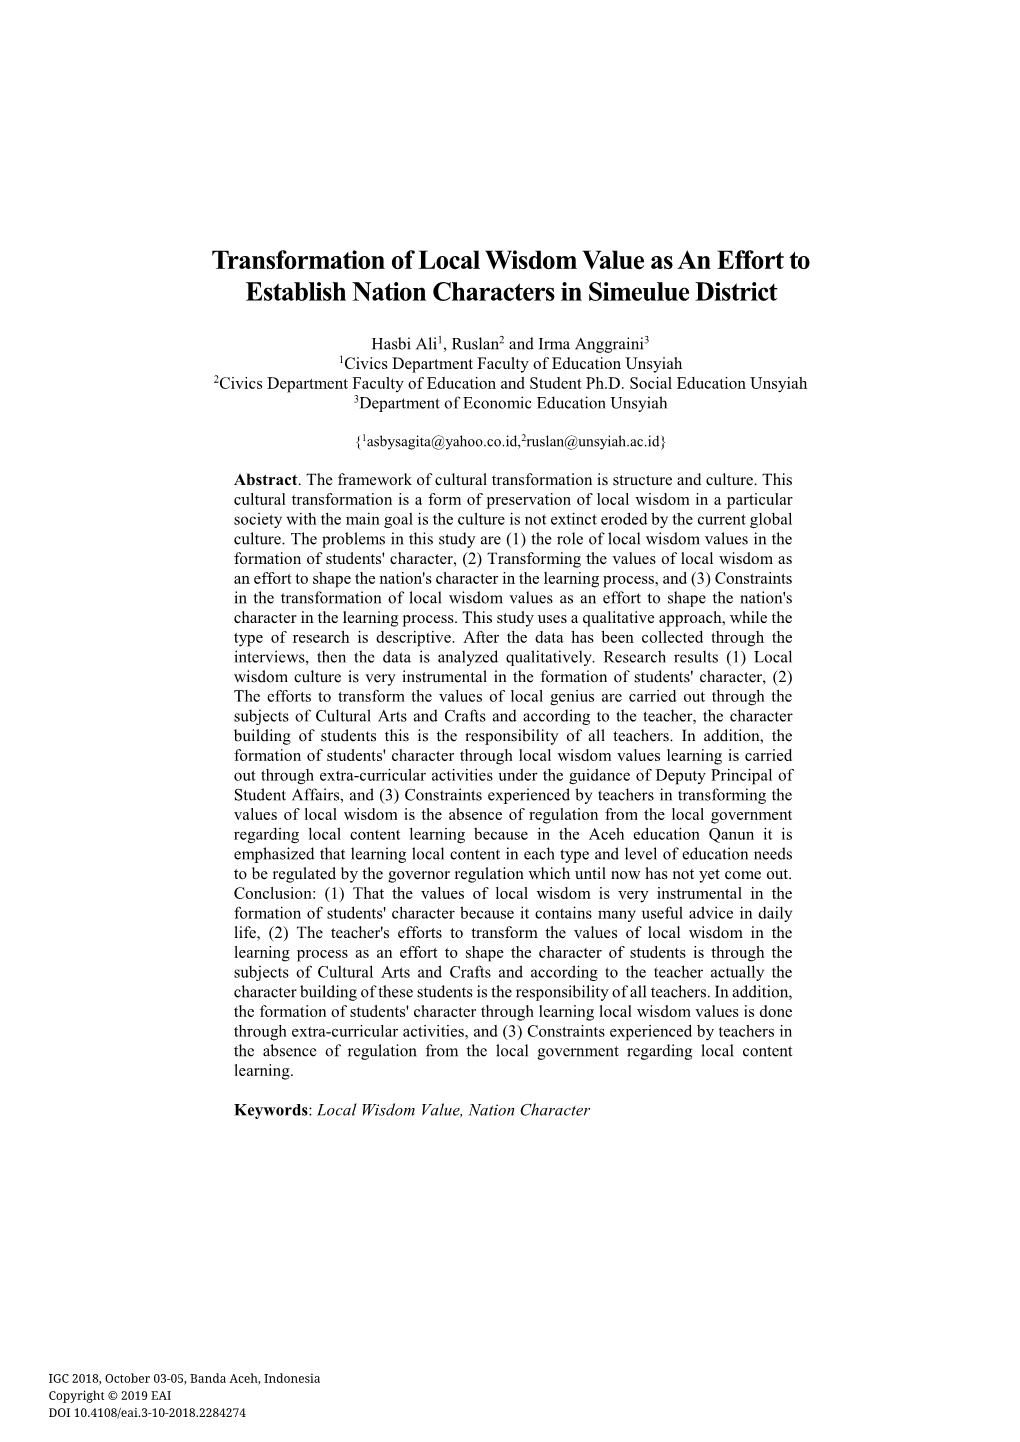 Transformation of Local Wisdom Value As an Effort to Establish Nation Characters in Simeulue District